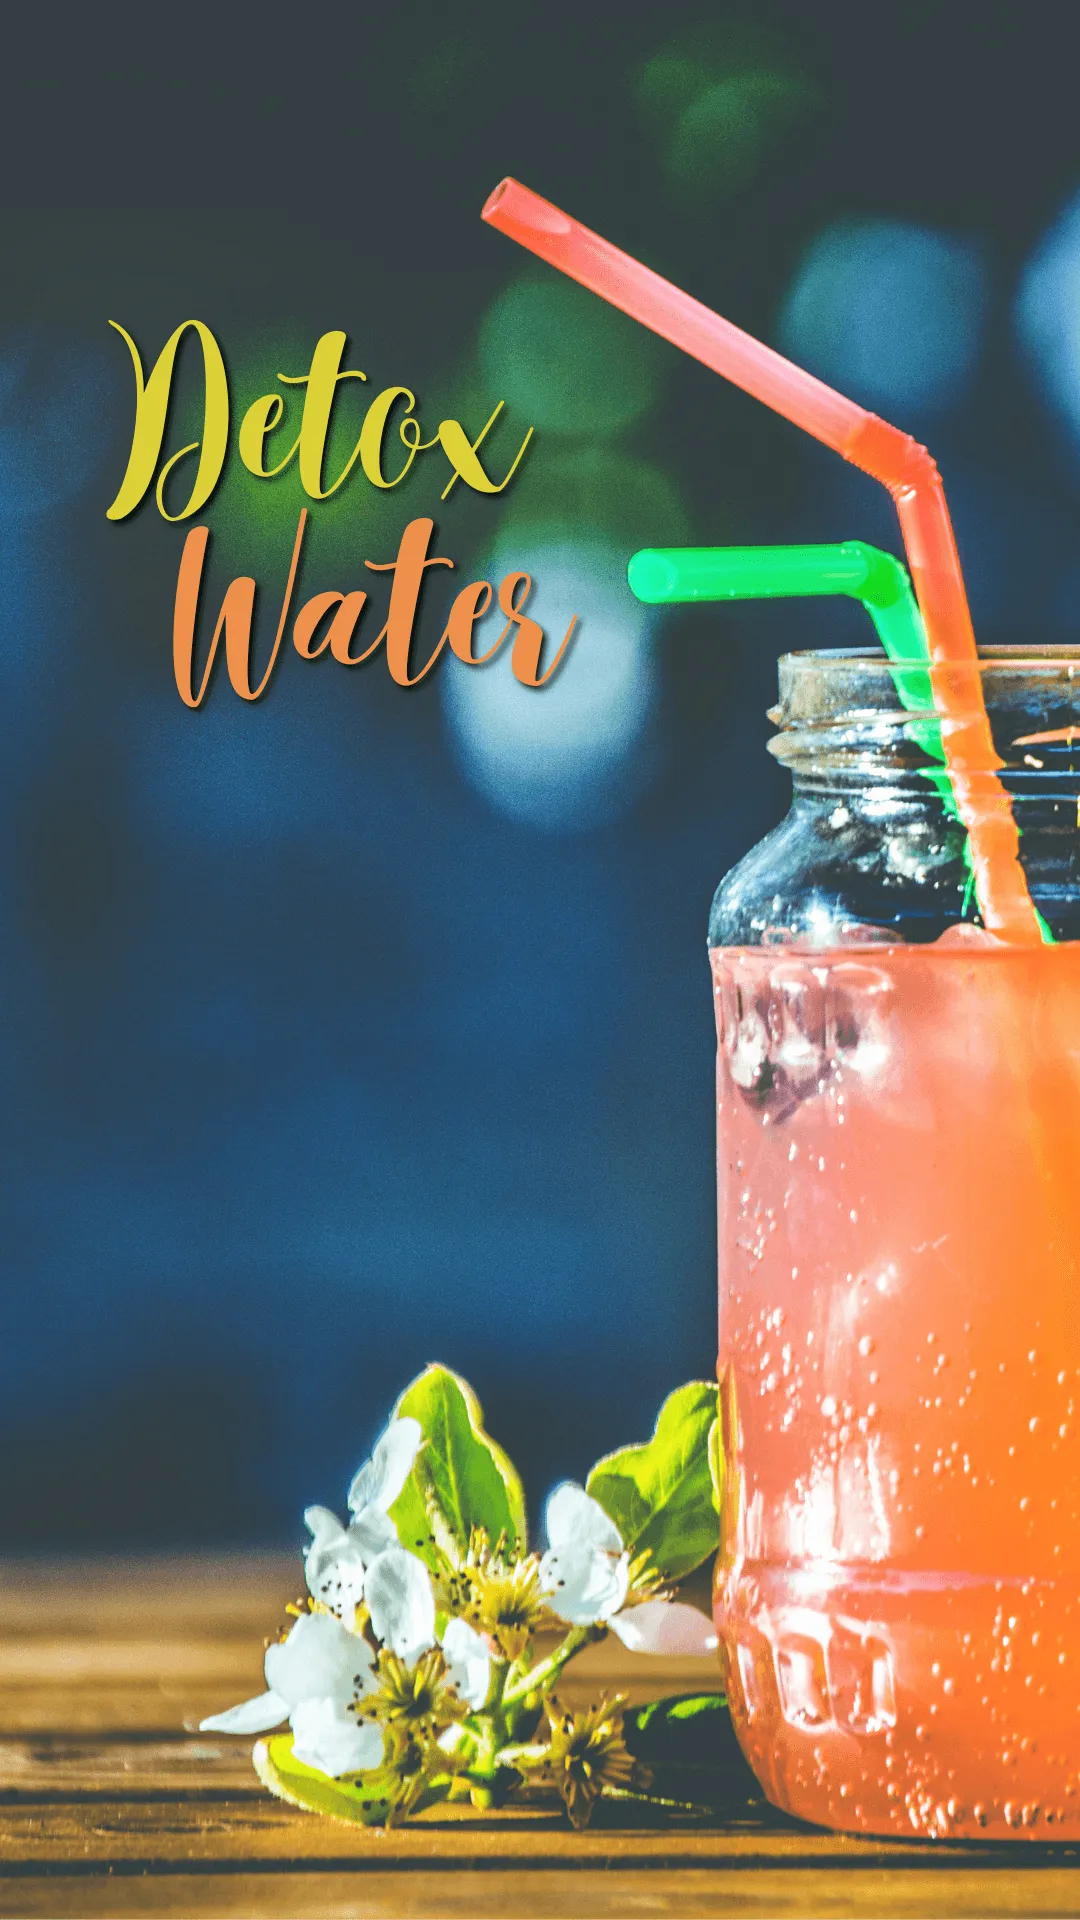 Wants to lose weight & glowing skin, try hydrating detox water